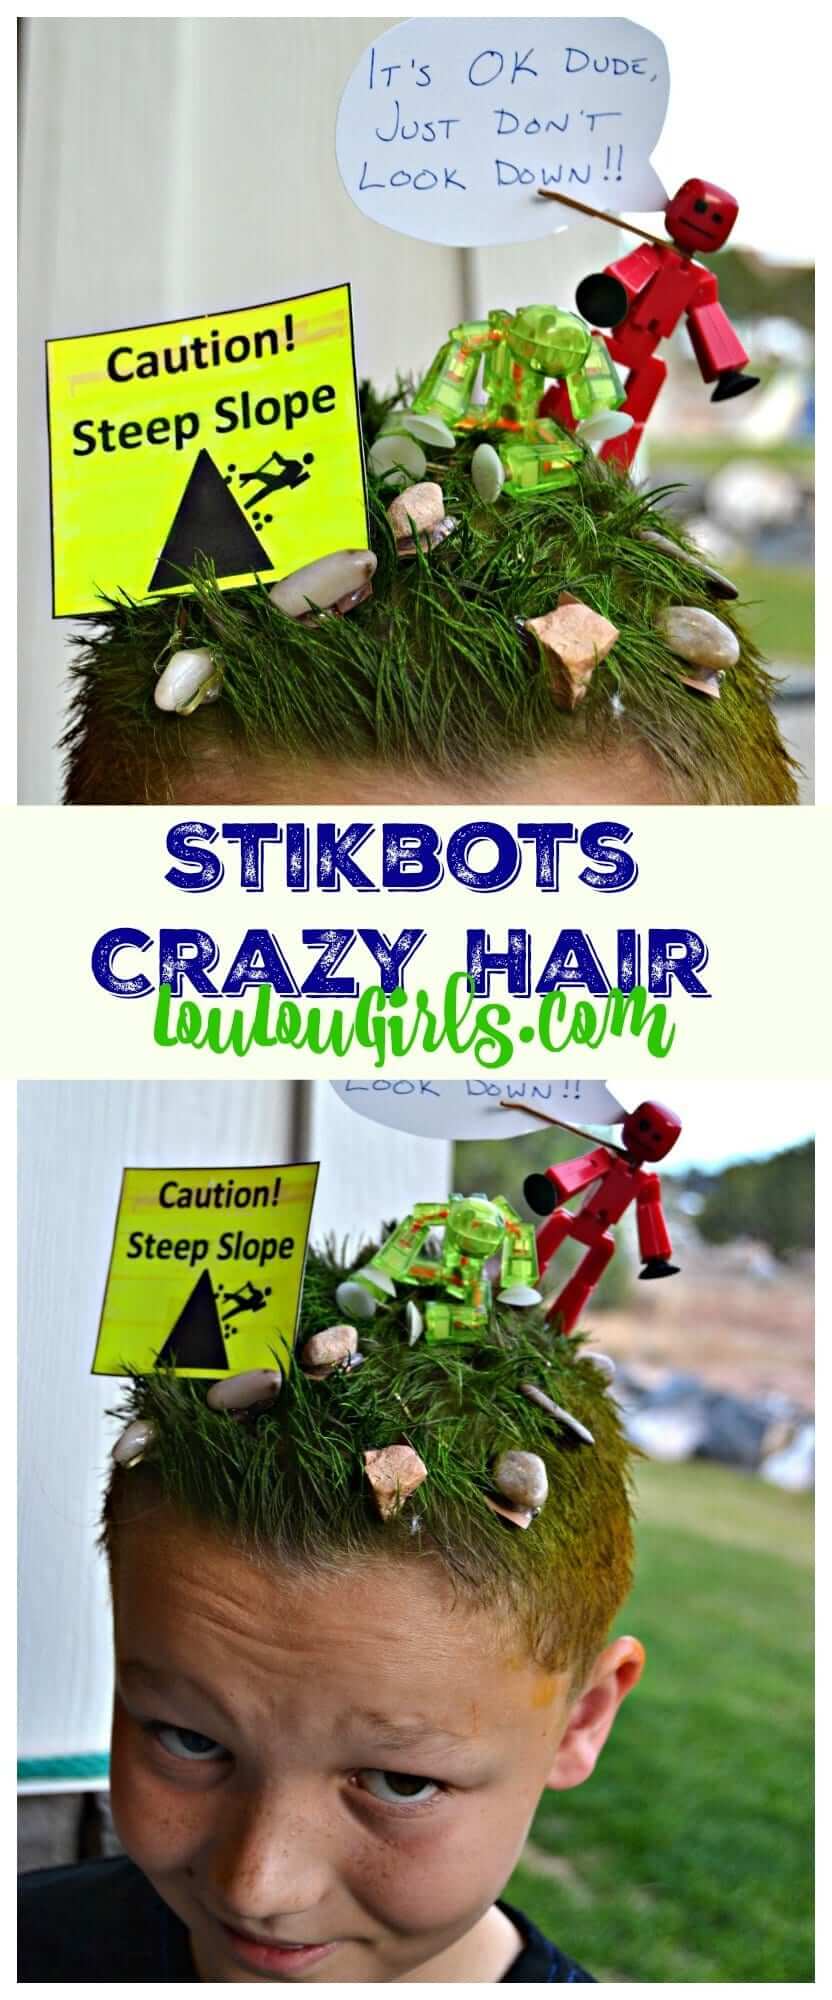 Stikbots Crazy Hair Day